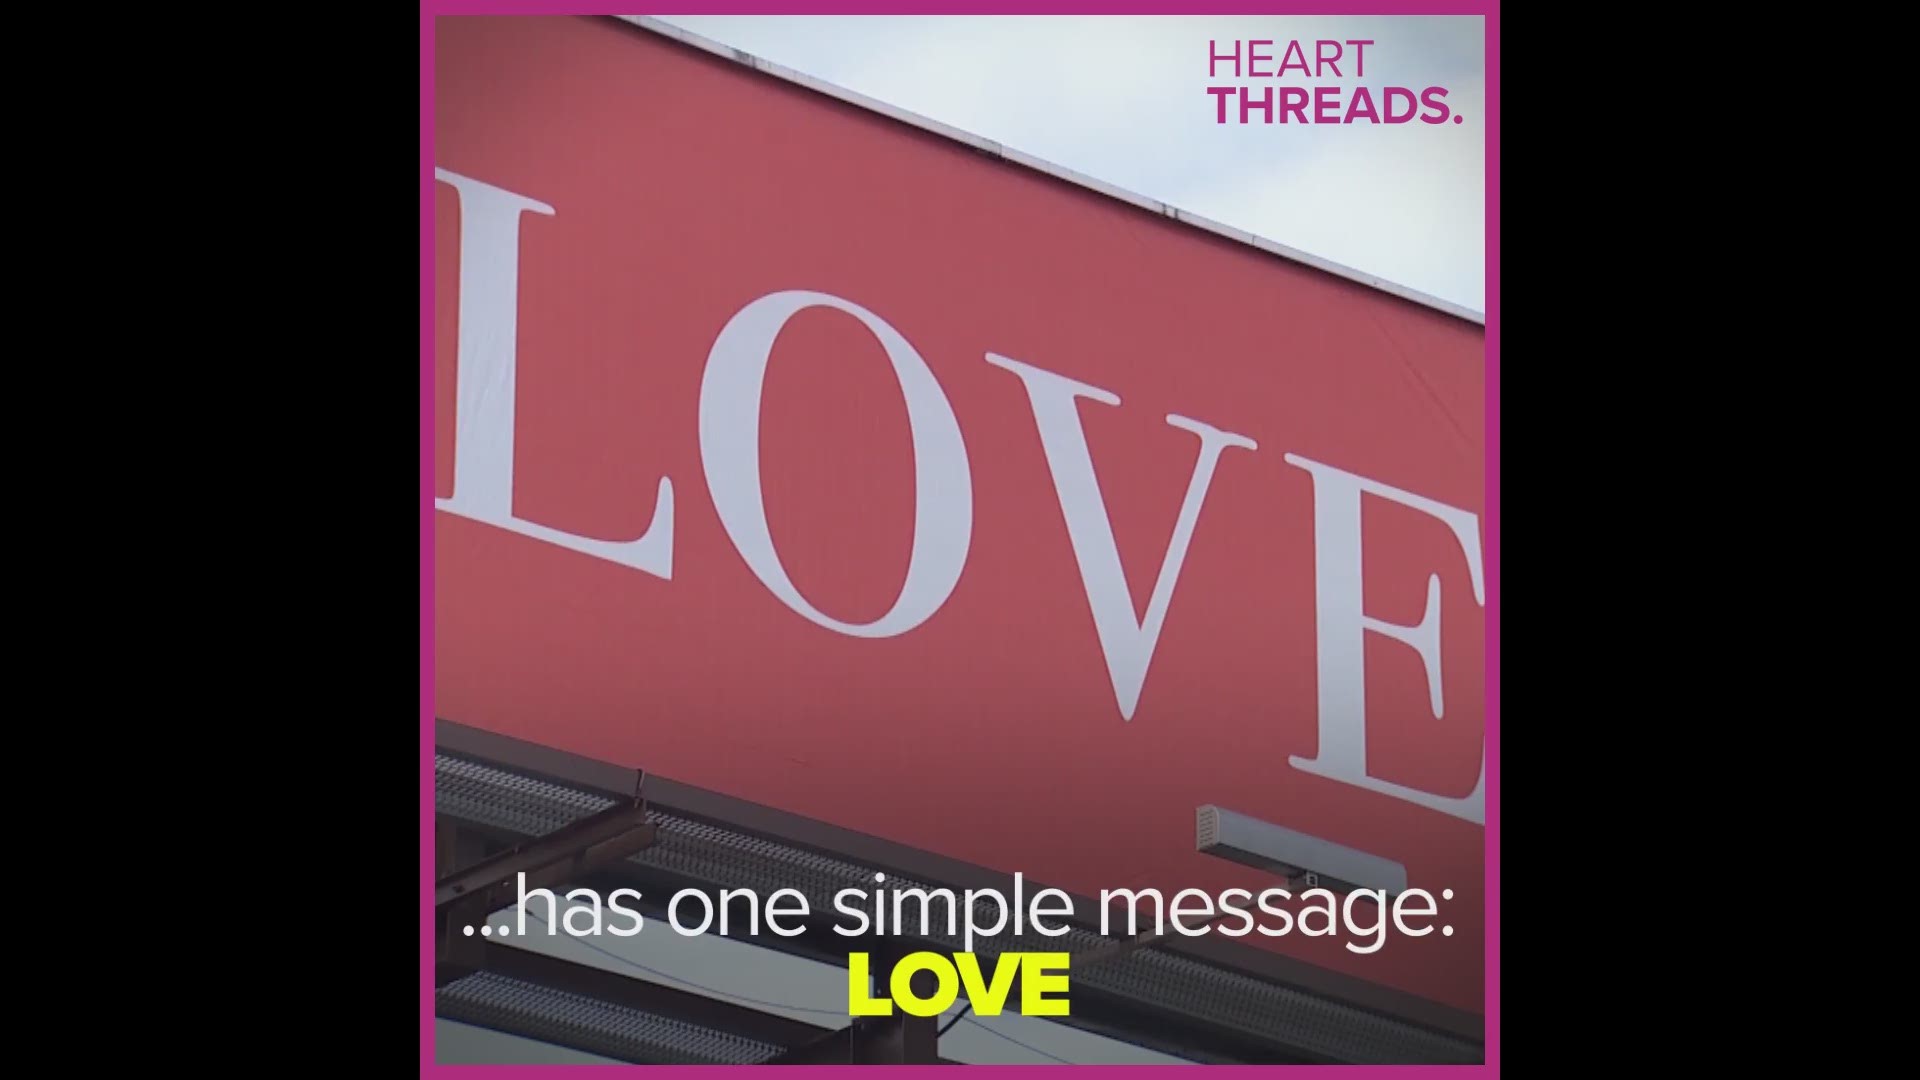 As an experiment, John Pogachar rented a billboard and put a single word on it: LOVE. Since then, 15 more LOVE billboards have popped up from Montana to Detroit.